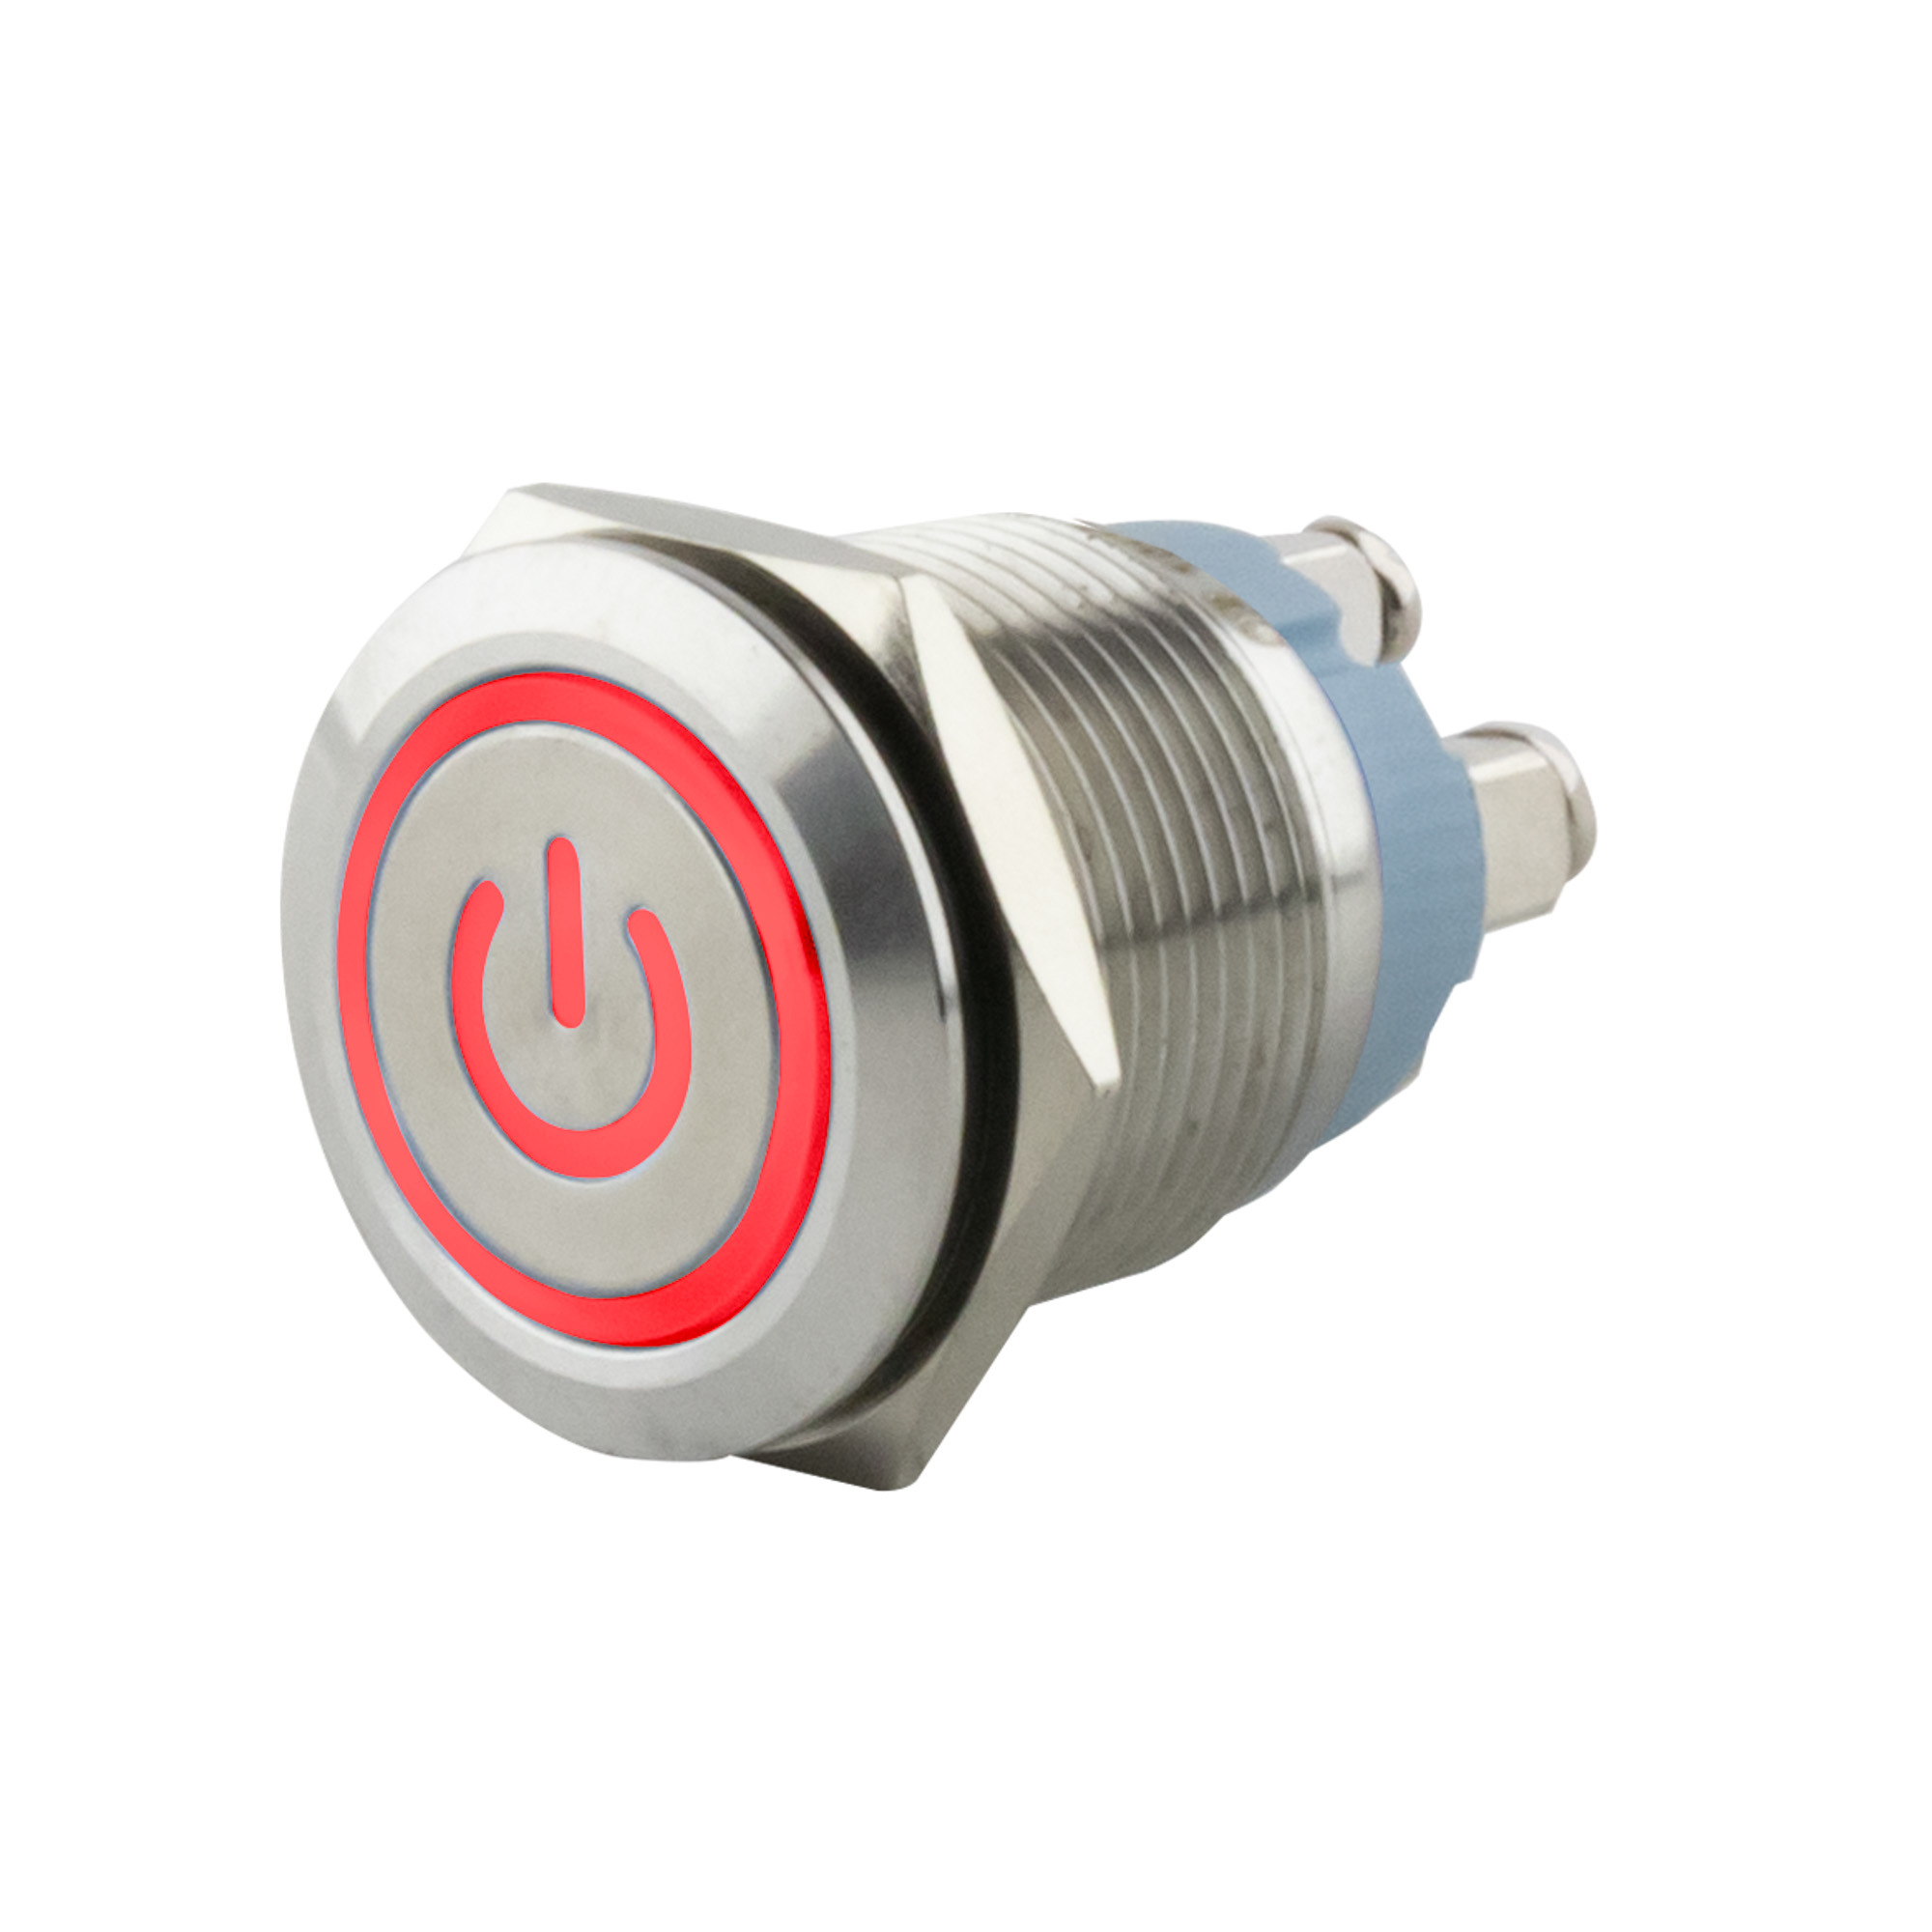 Push-button momentary Ø19mm symbol Power LED red -screw